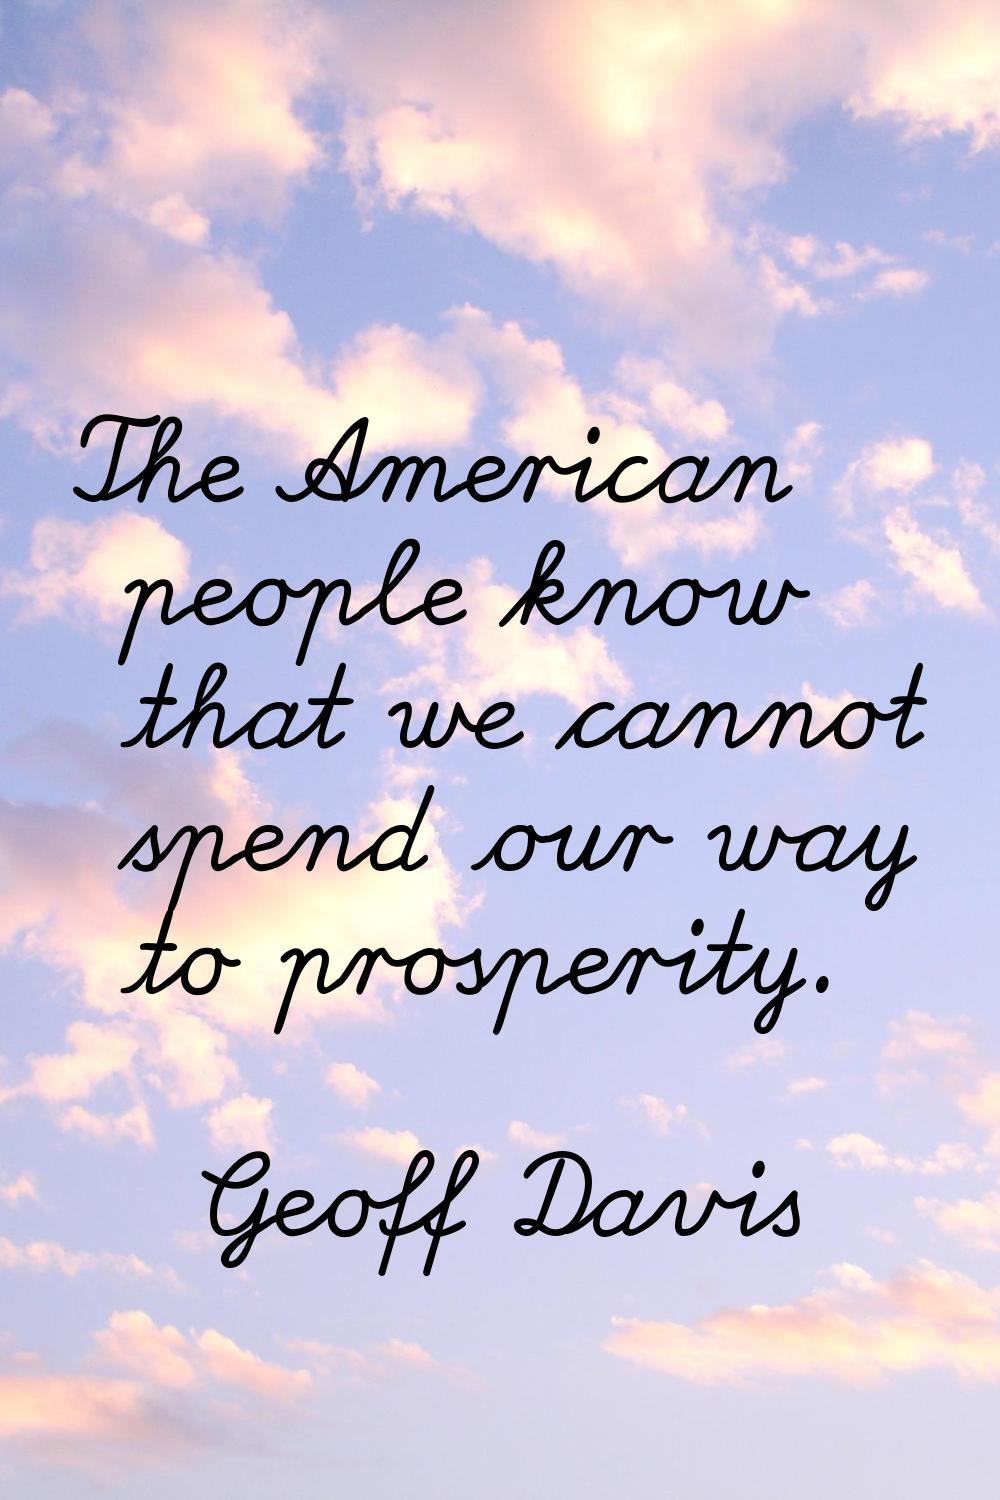 The American people know that we cannot spend our way to prosperity.